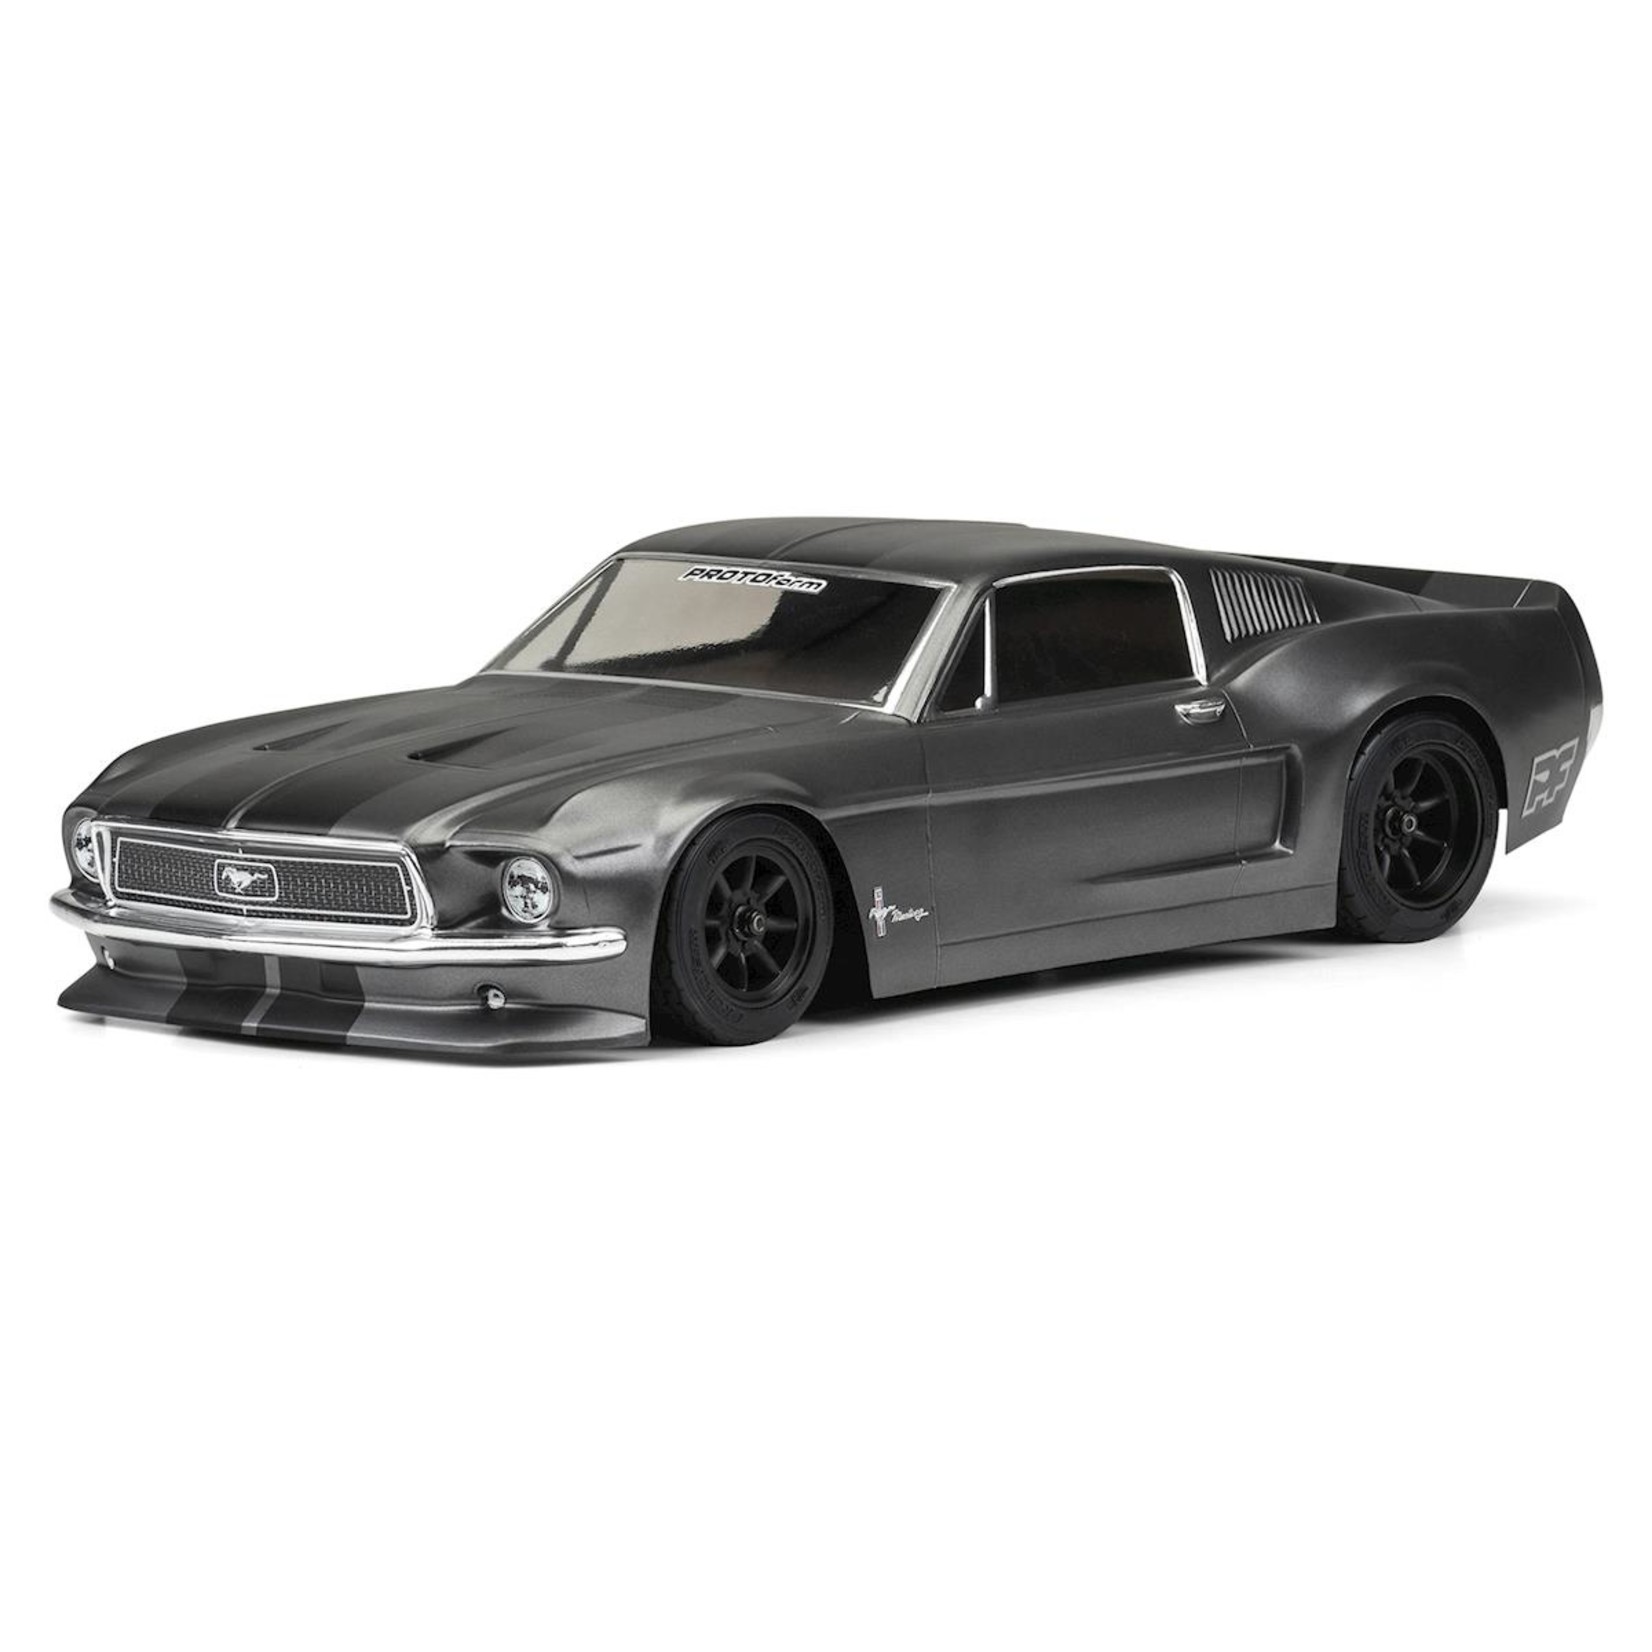 PROTOform PROTOform 1968 Ford Mustang Vintage Trans-Am Racing Body (Clear) #1558-40